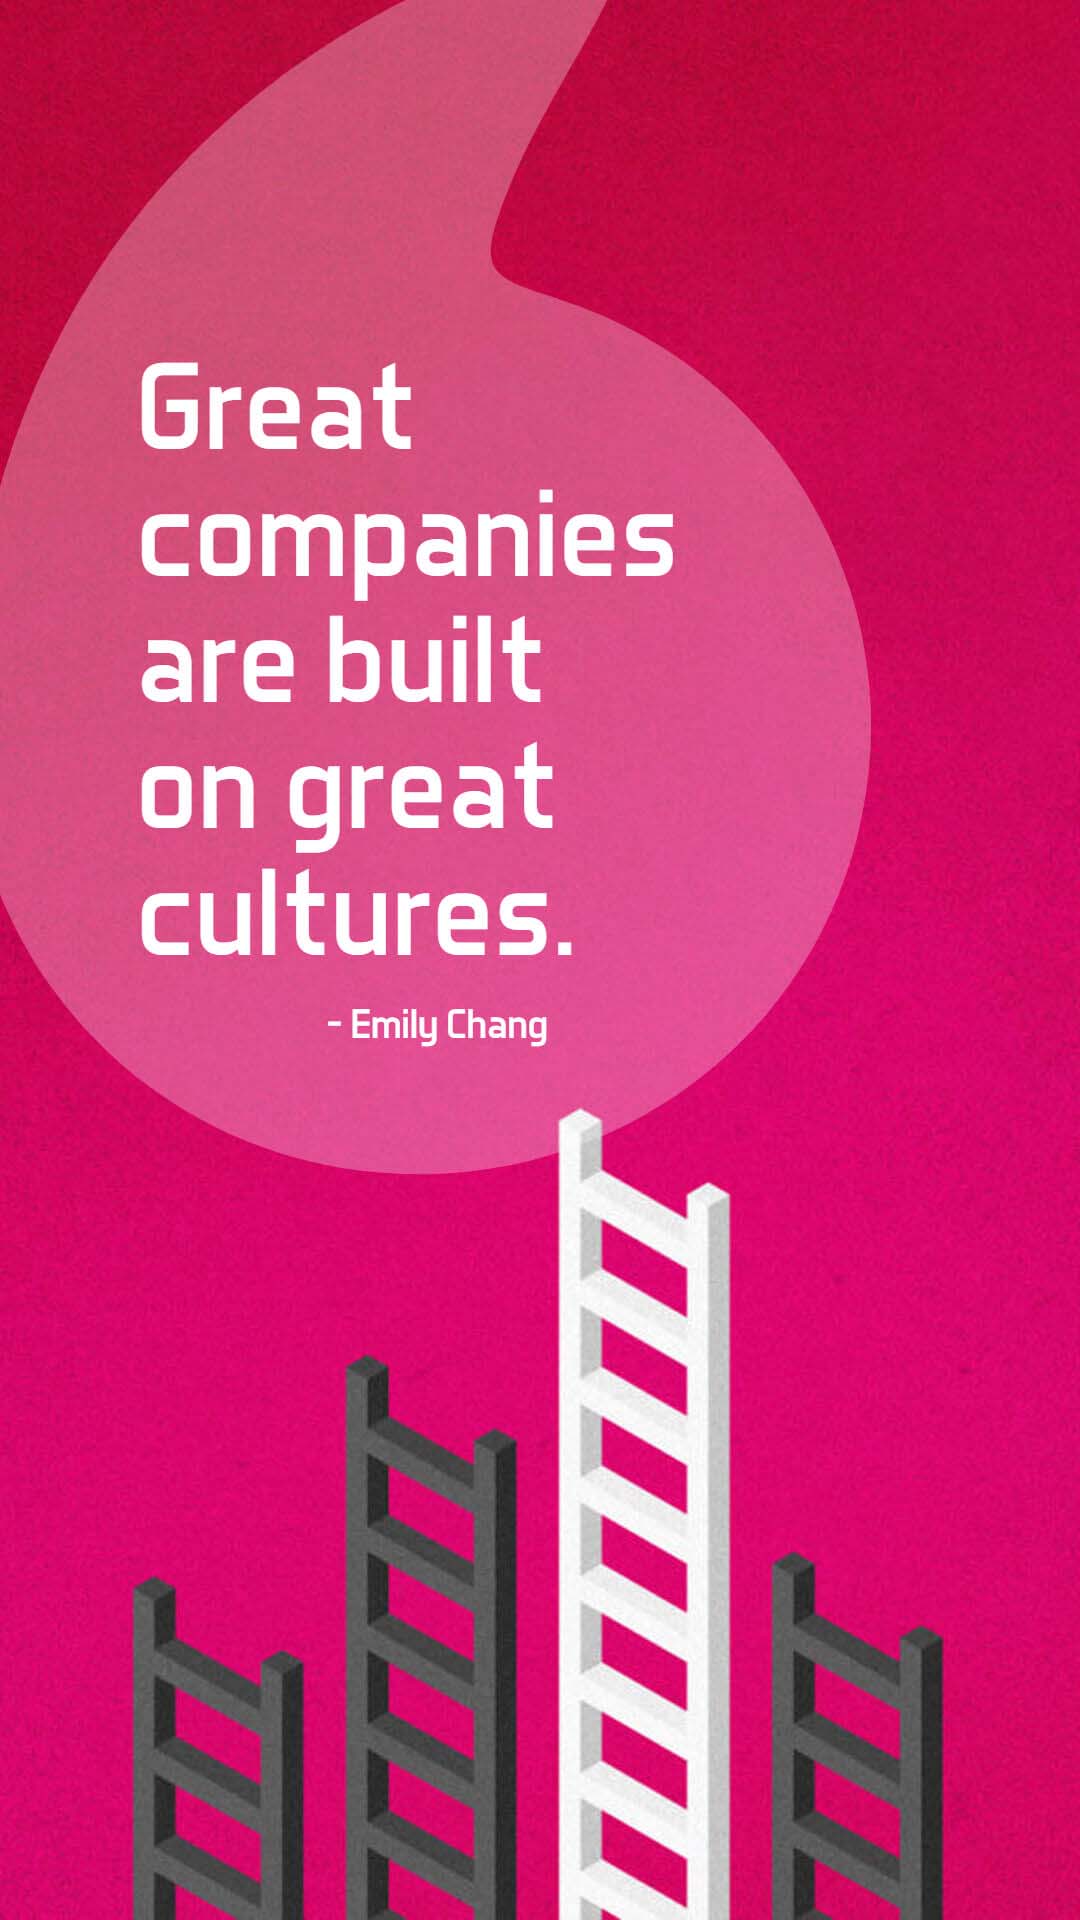 emily chang quote on business culture